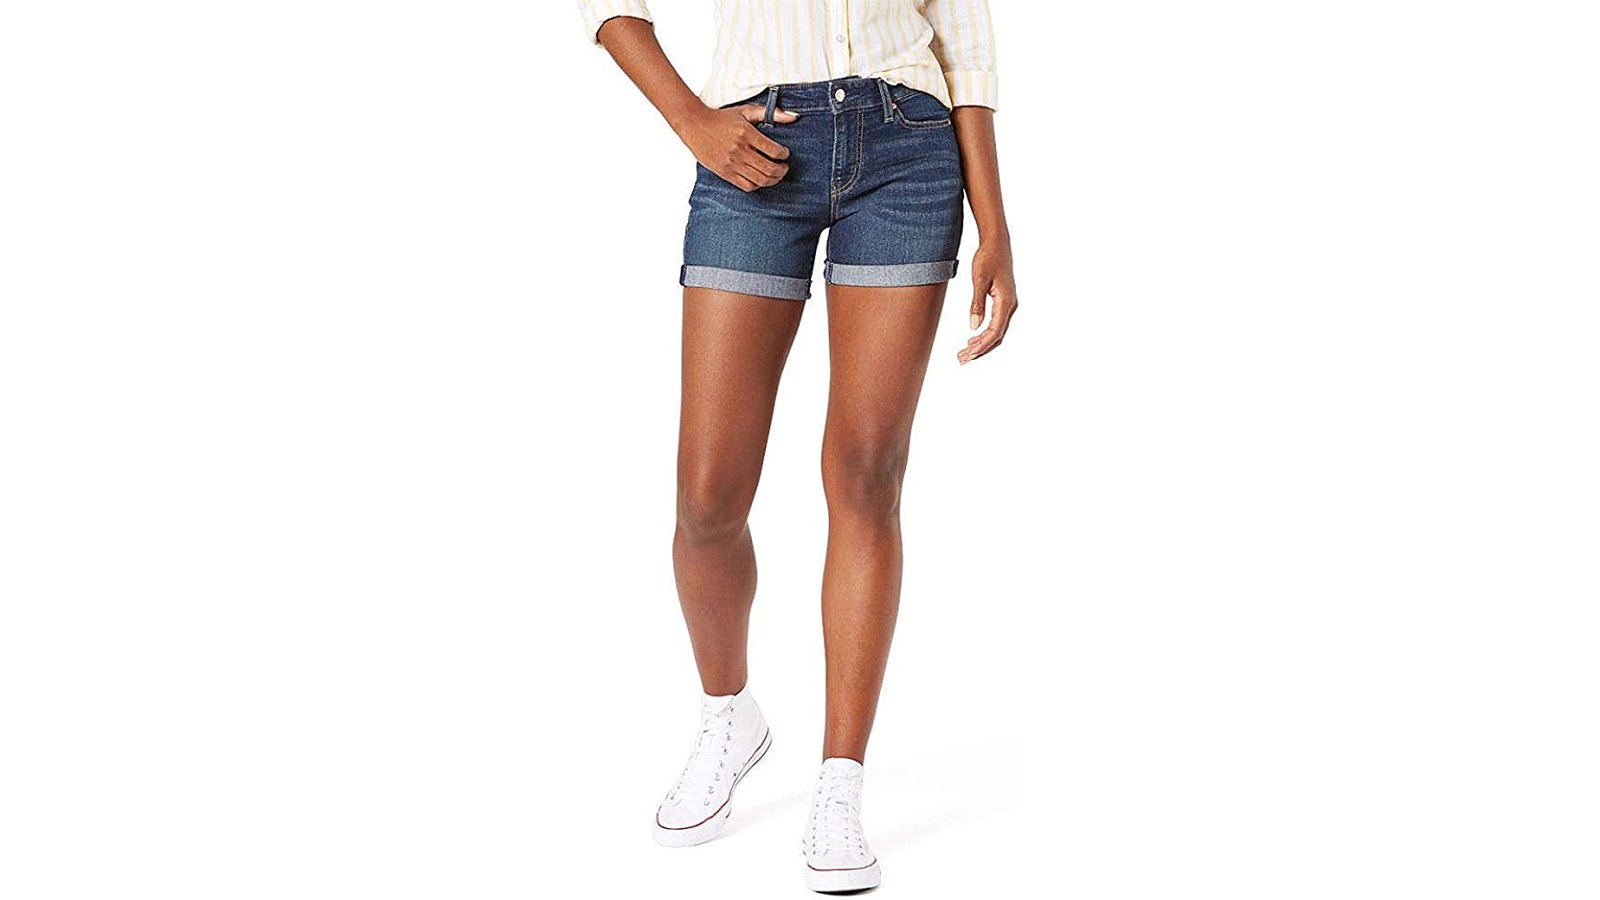 Levi's Gold Label Shorts Have an Unbelievable Amount of Stretch